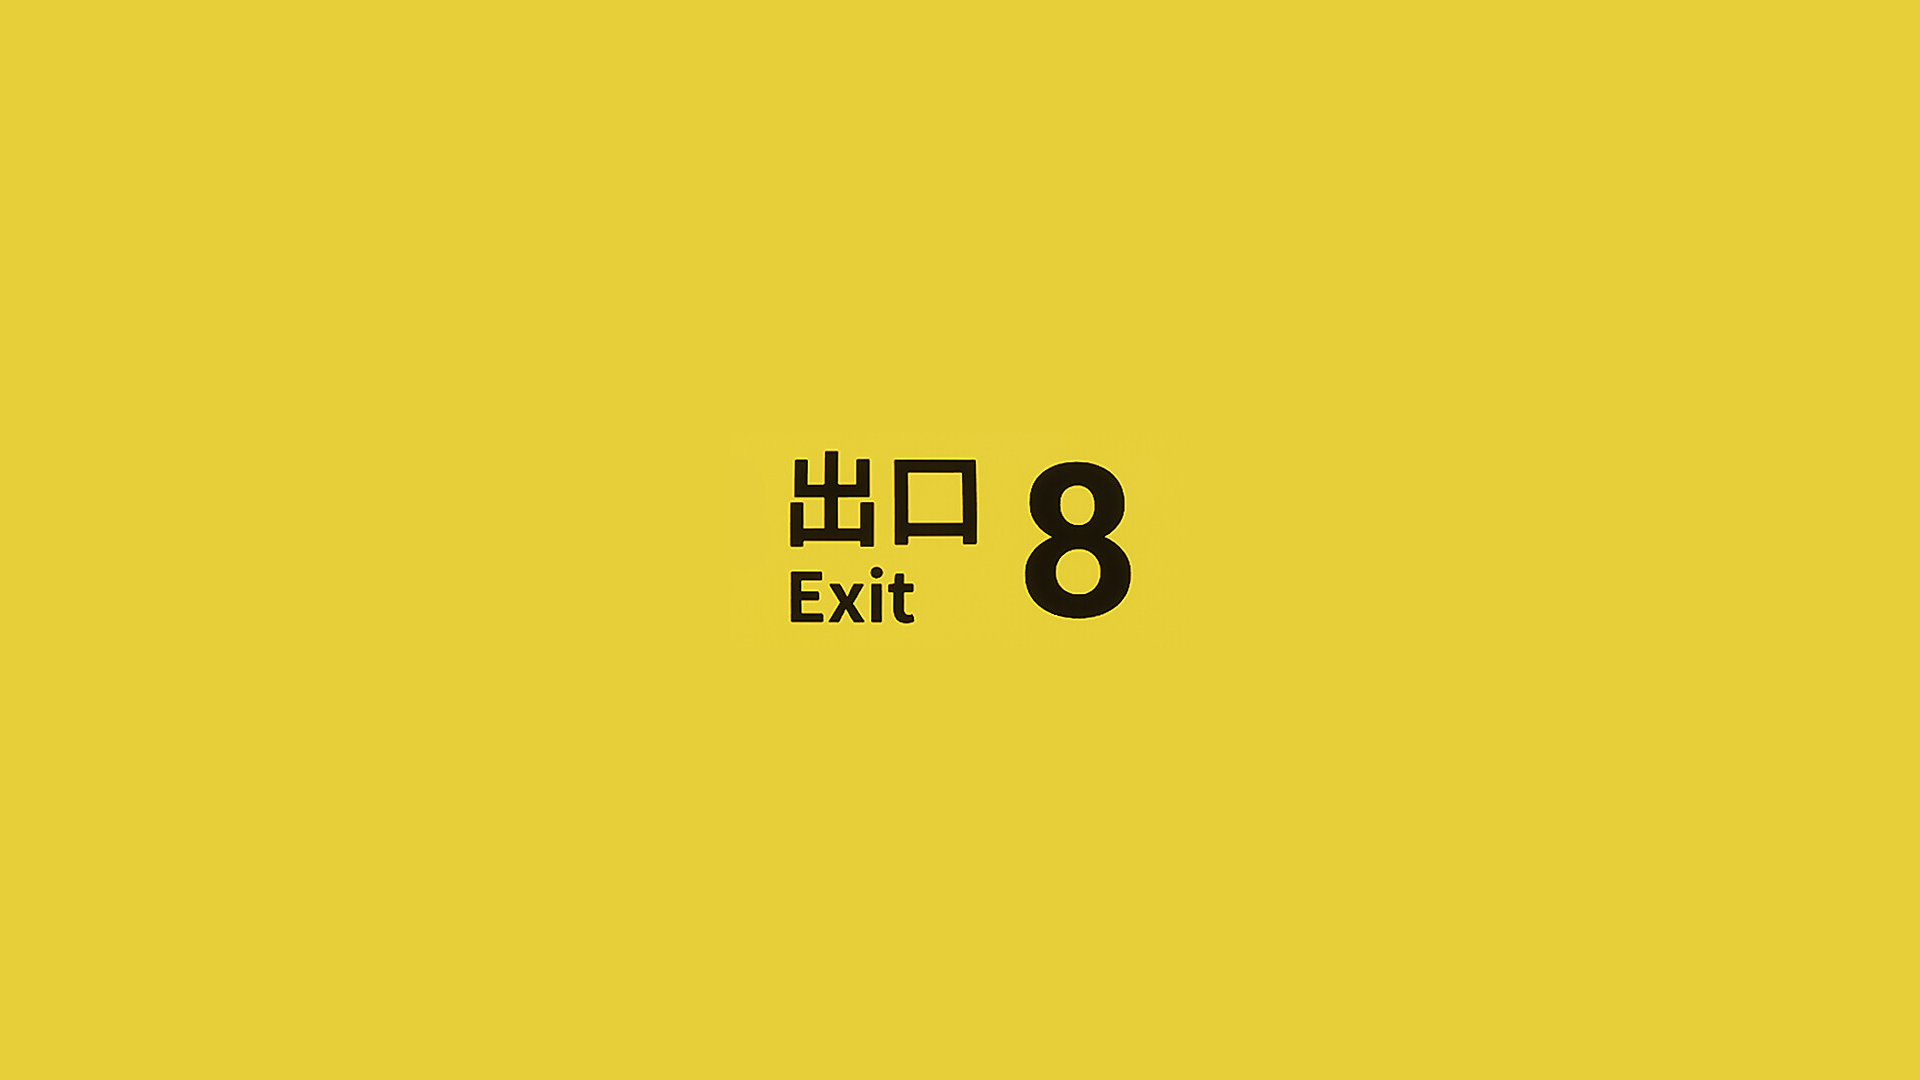 The title image / logo of The Exit 8, a video game.